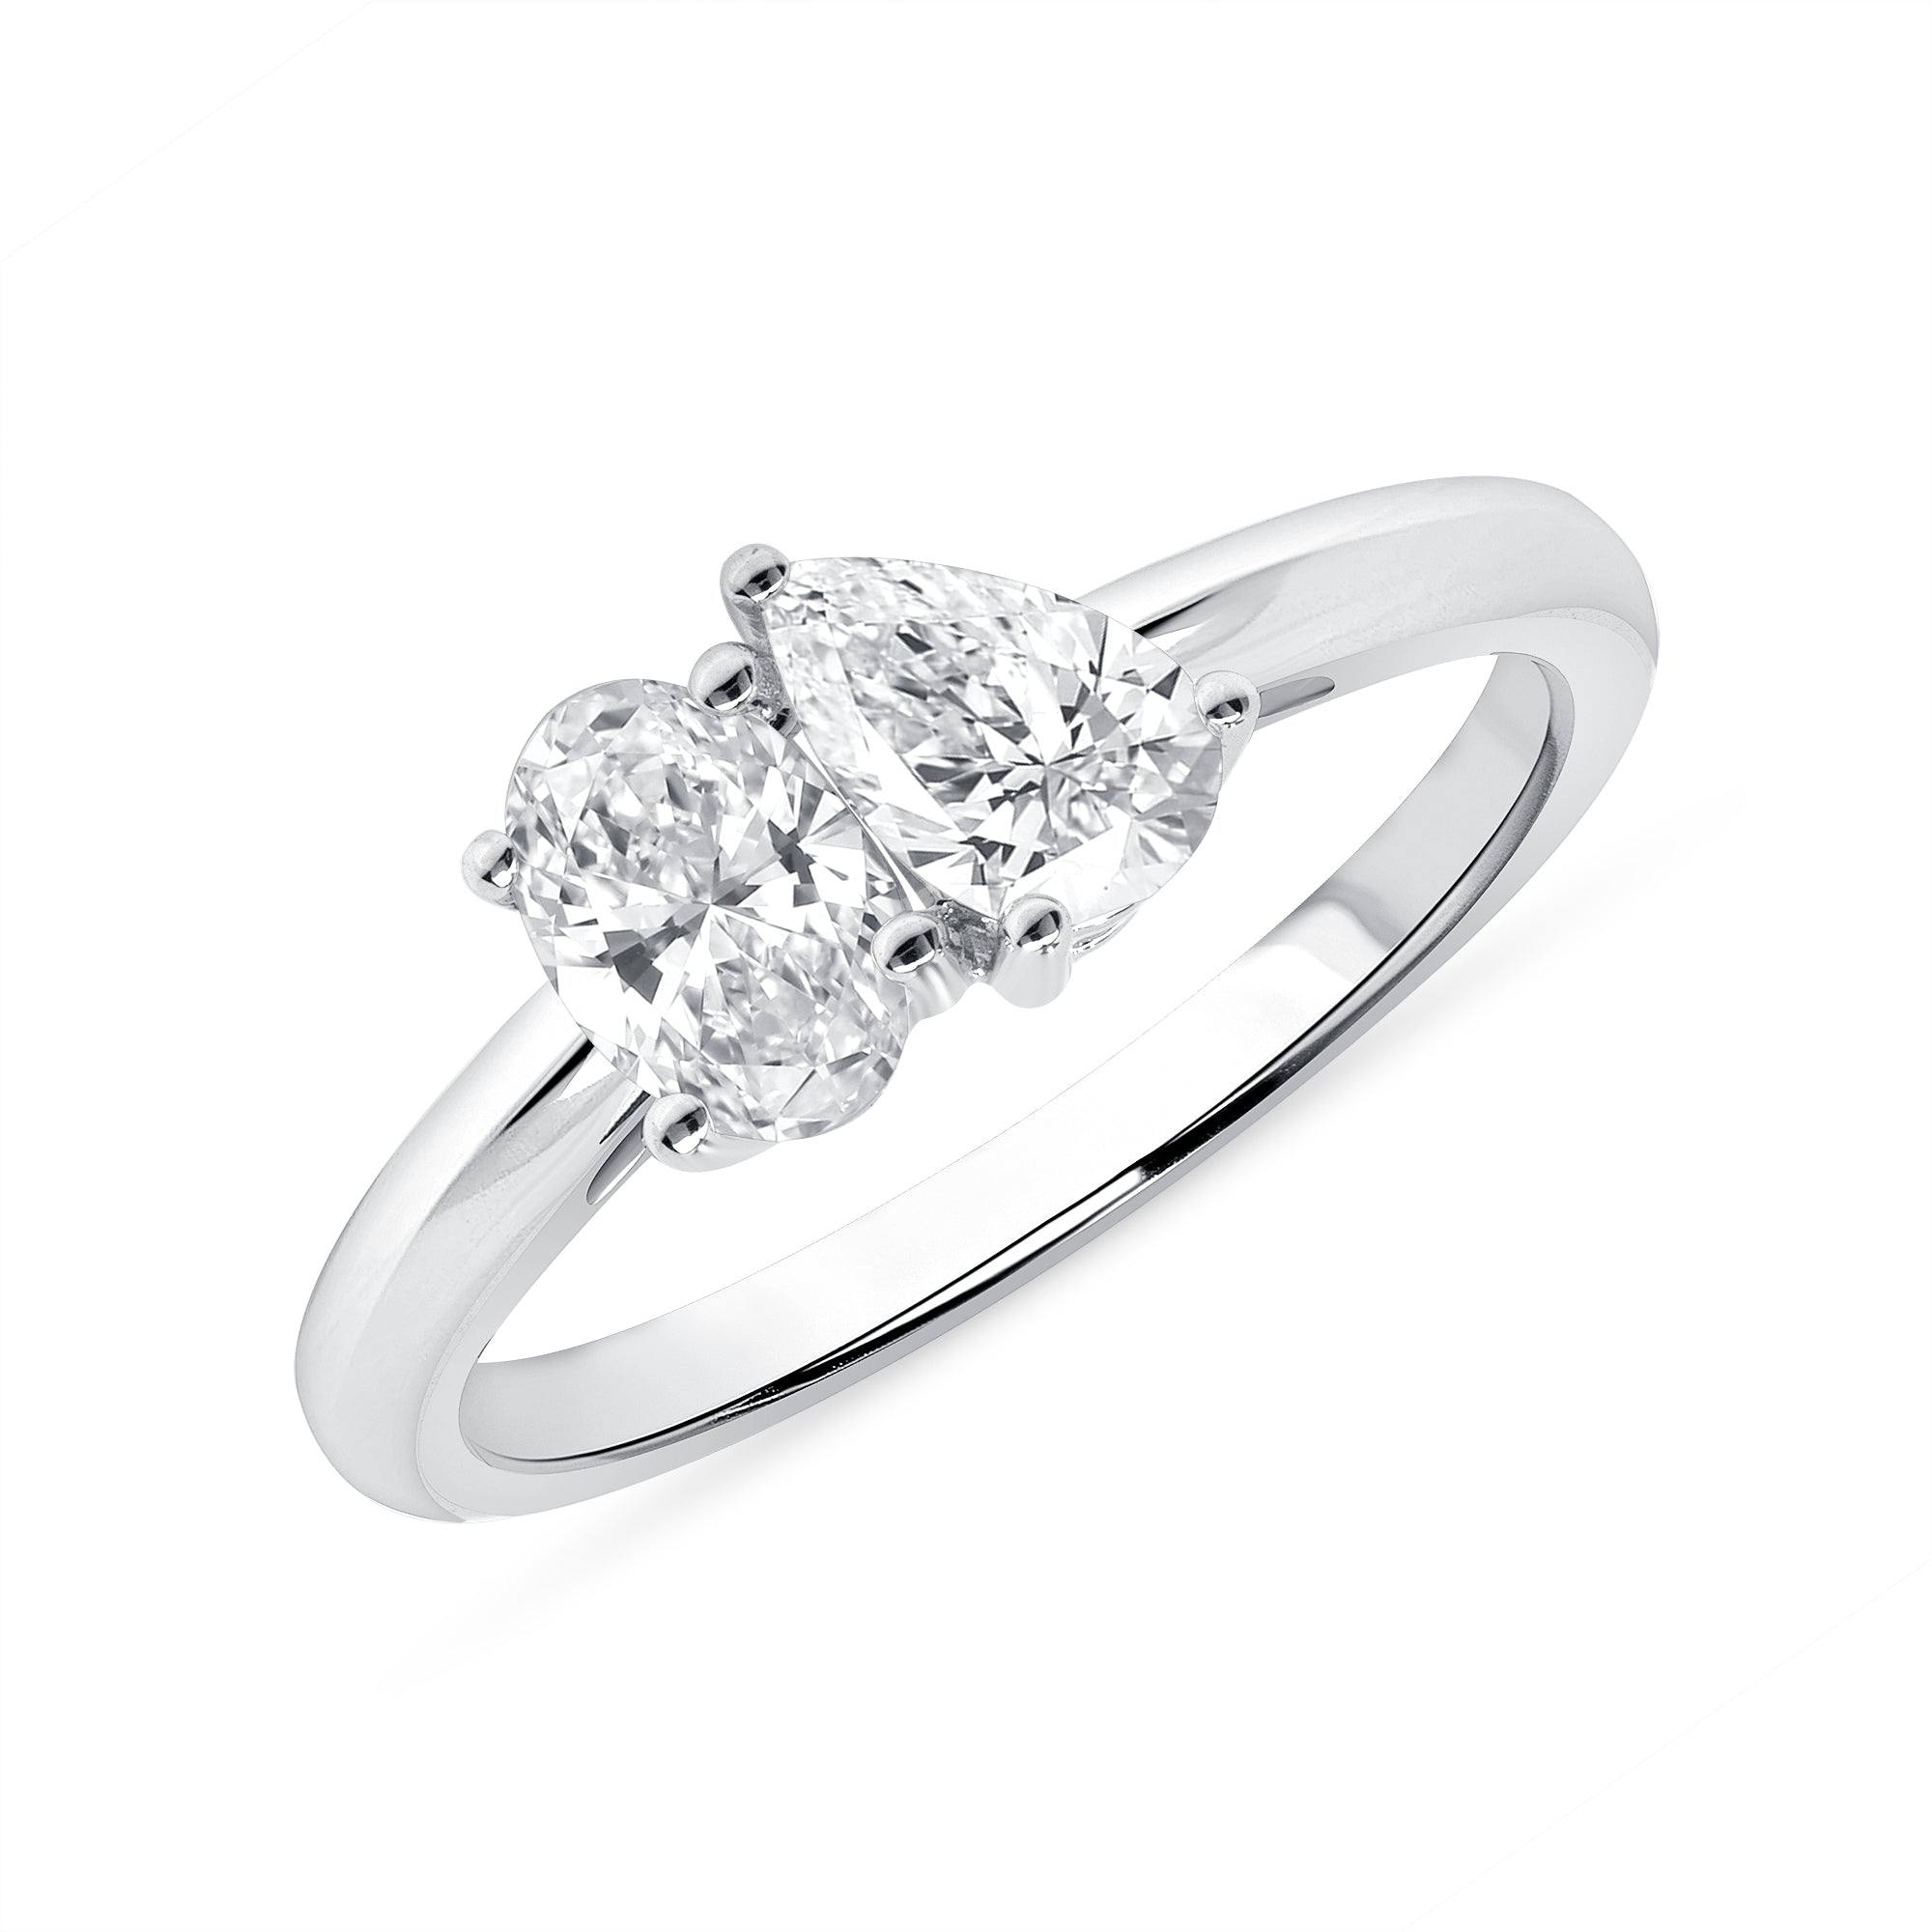 1 CT Oval & Pear Cut Diamond Toi et Moi Engagement Ring in 14K White Gold